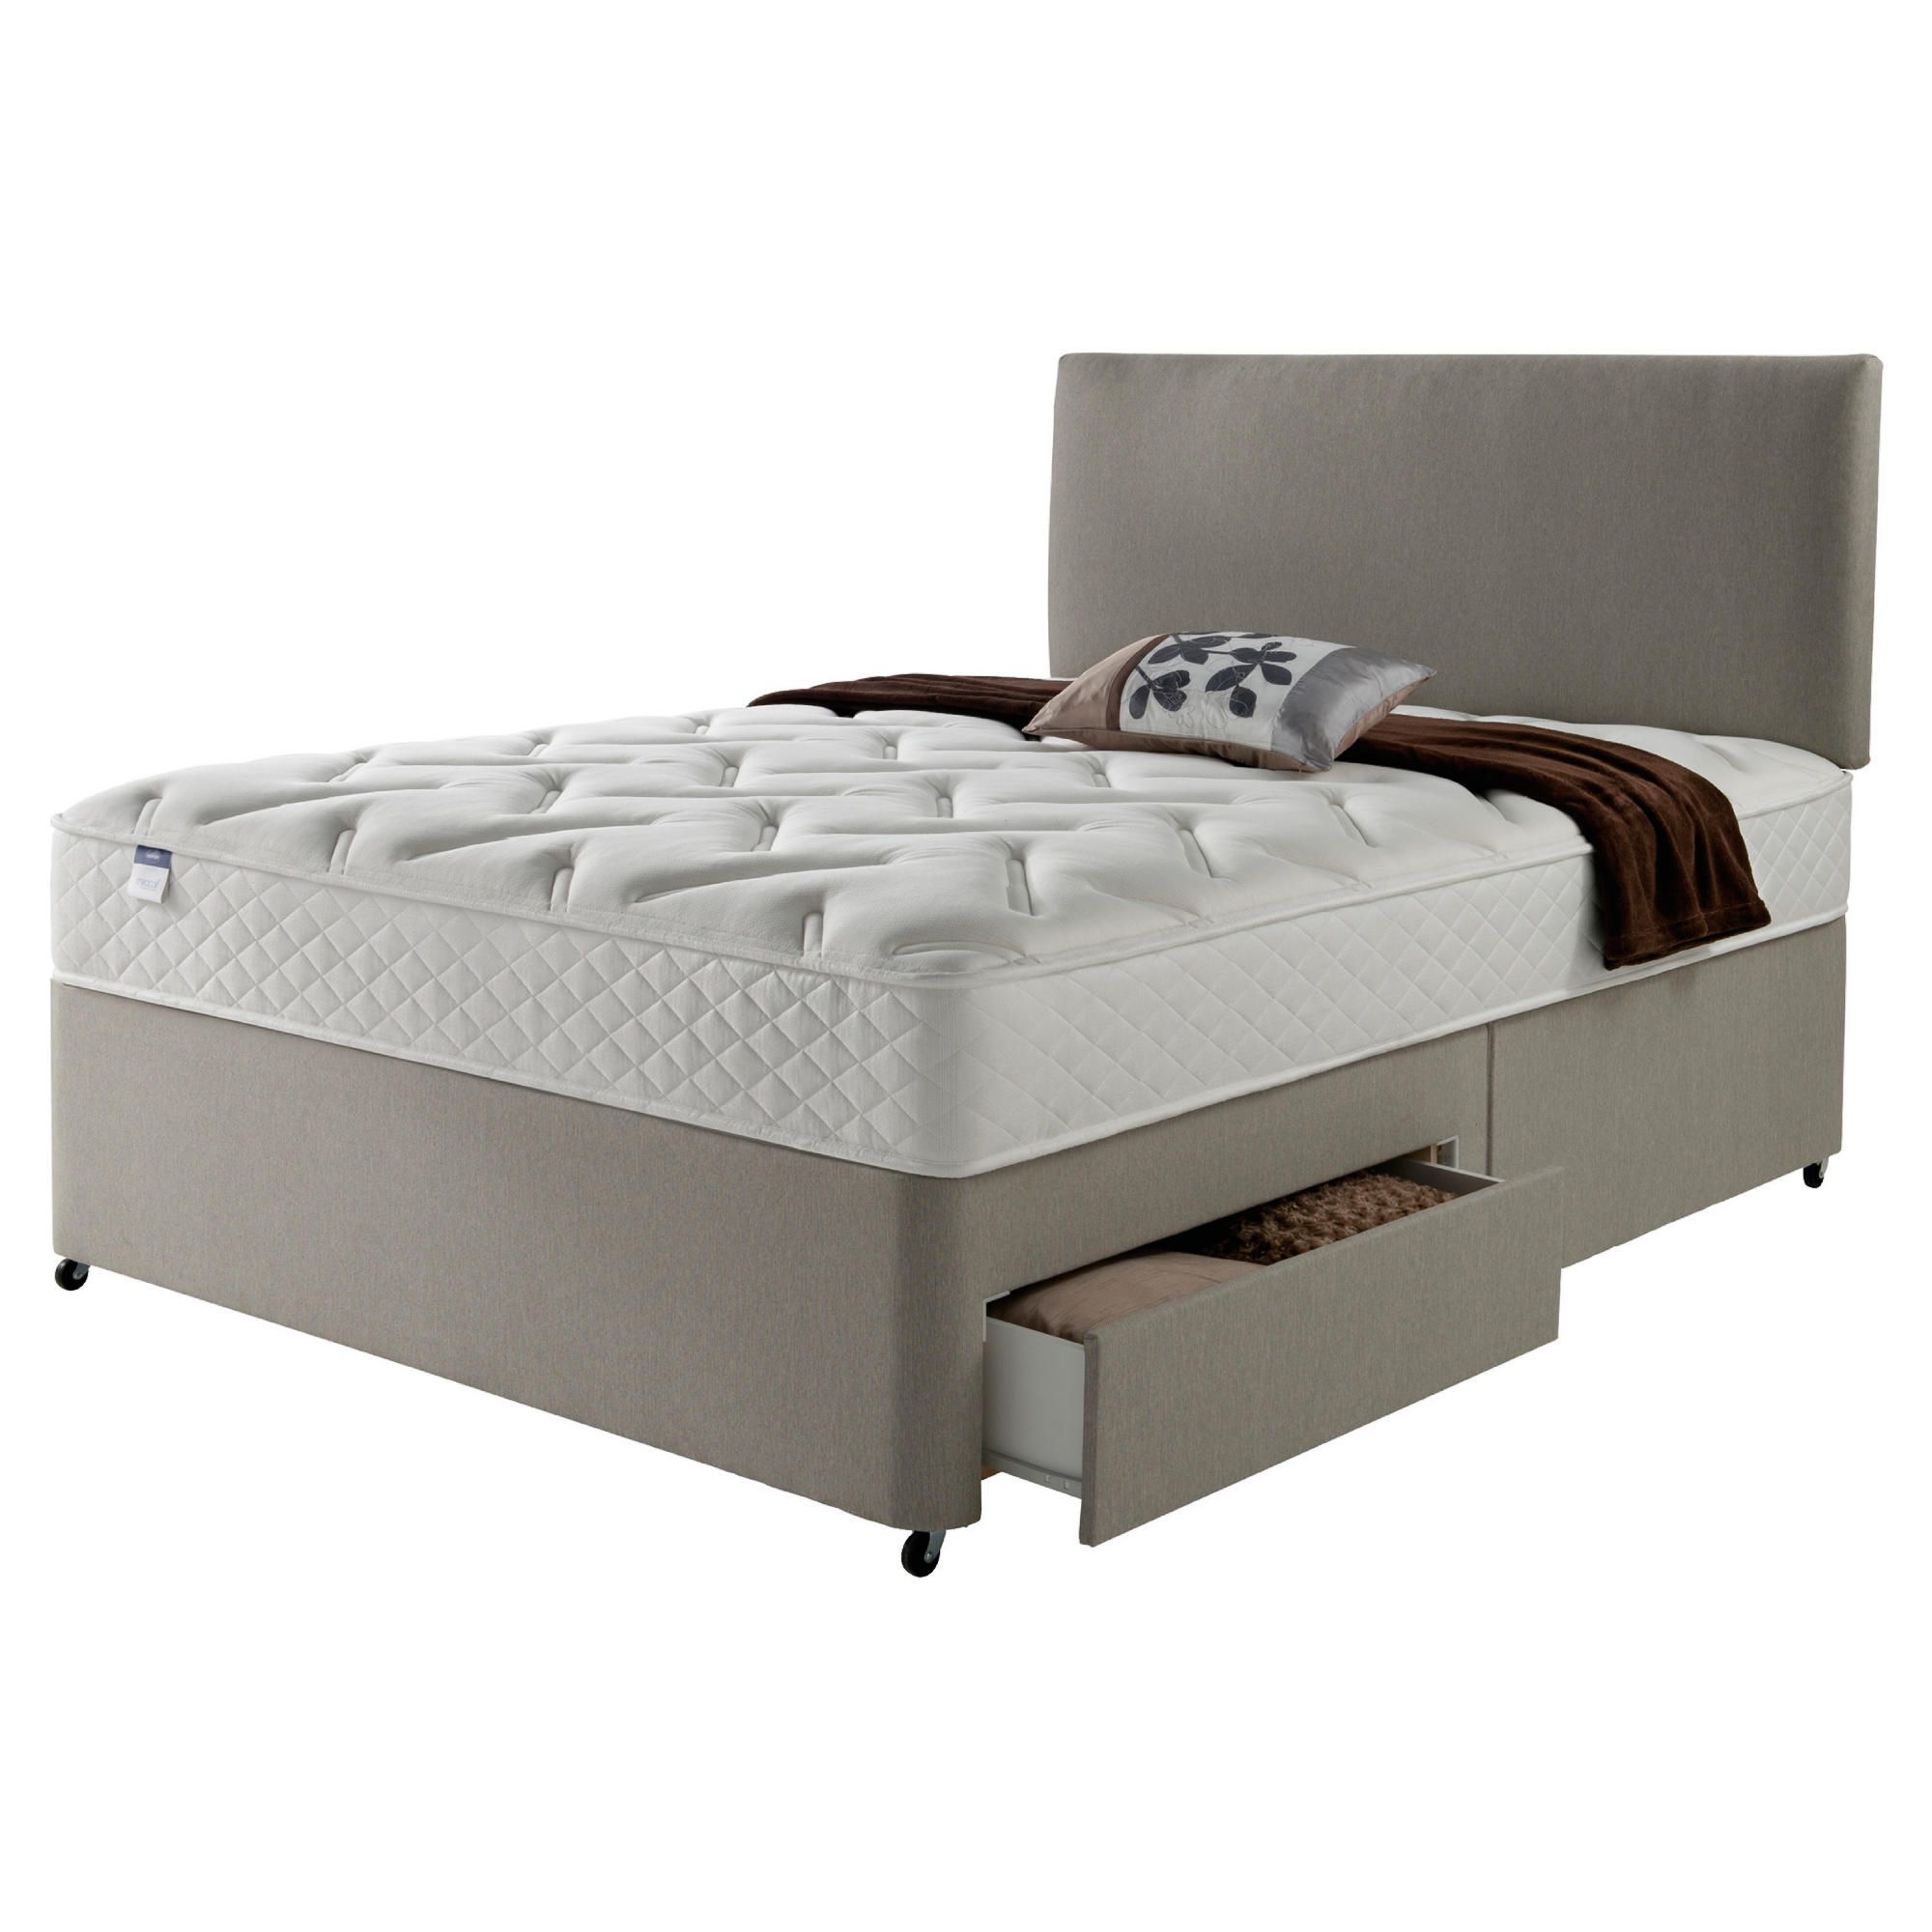 Silentnight Miracoil Luxury Memory 2 Drawer King Size Divan Mink with Headboard at Tesco Direct